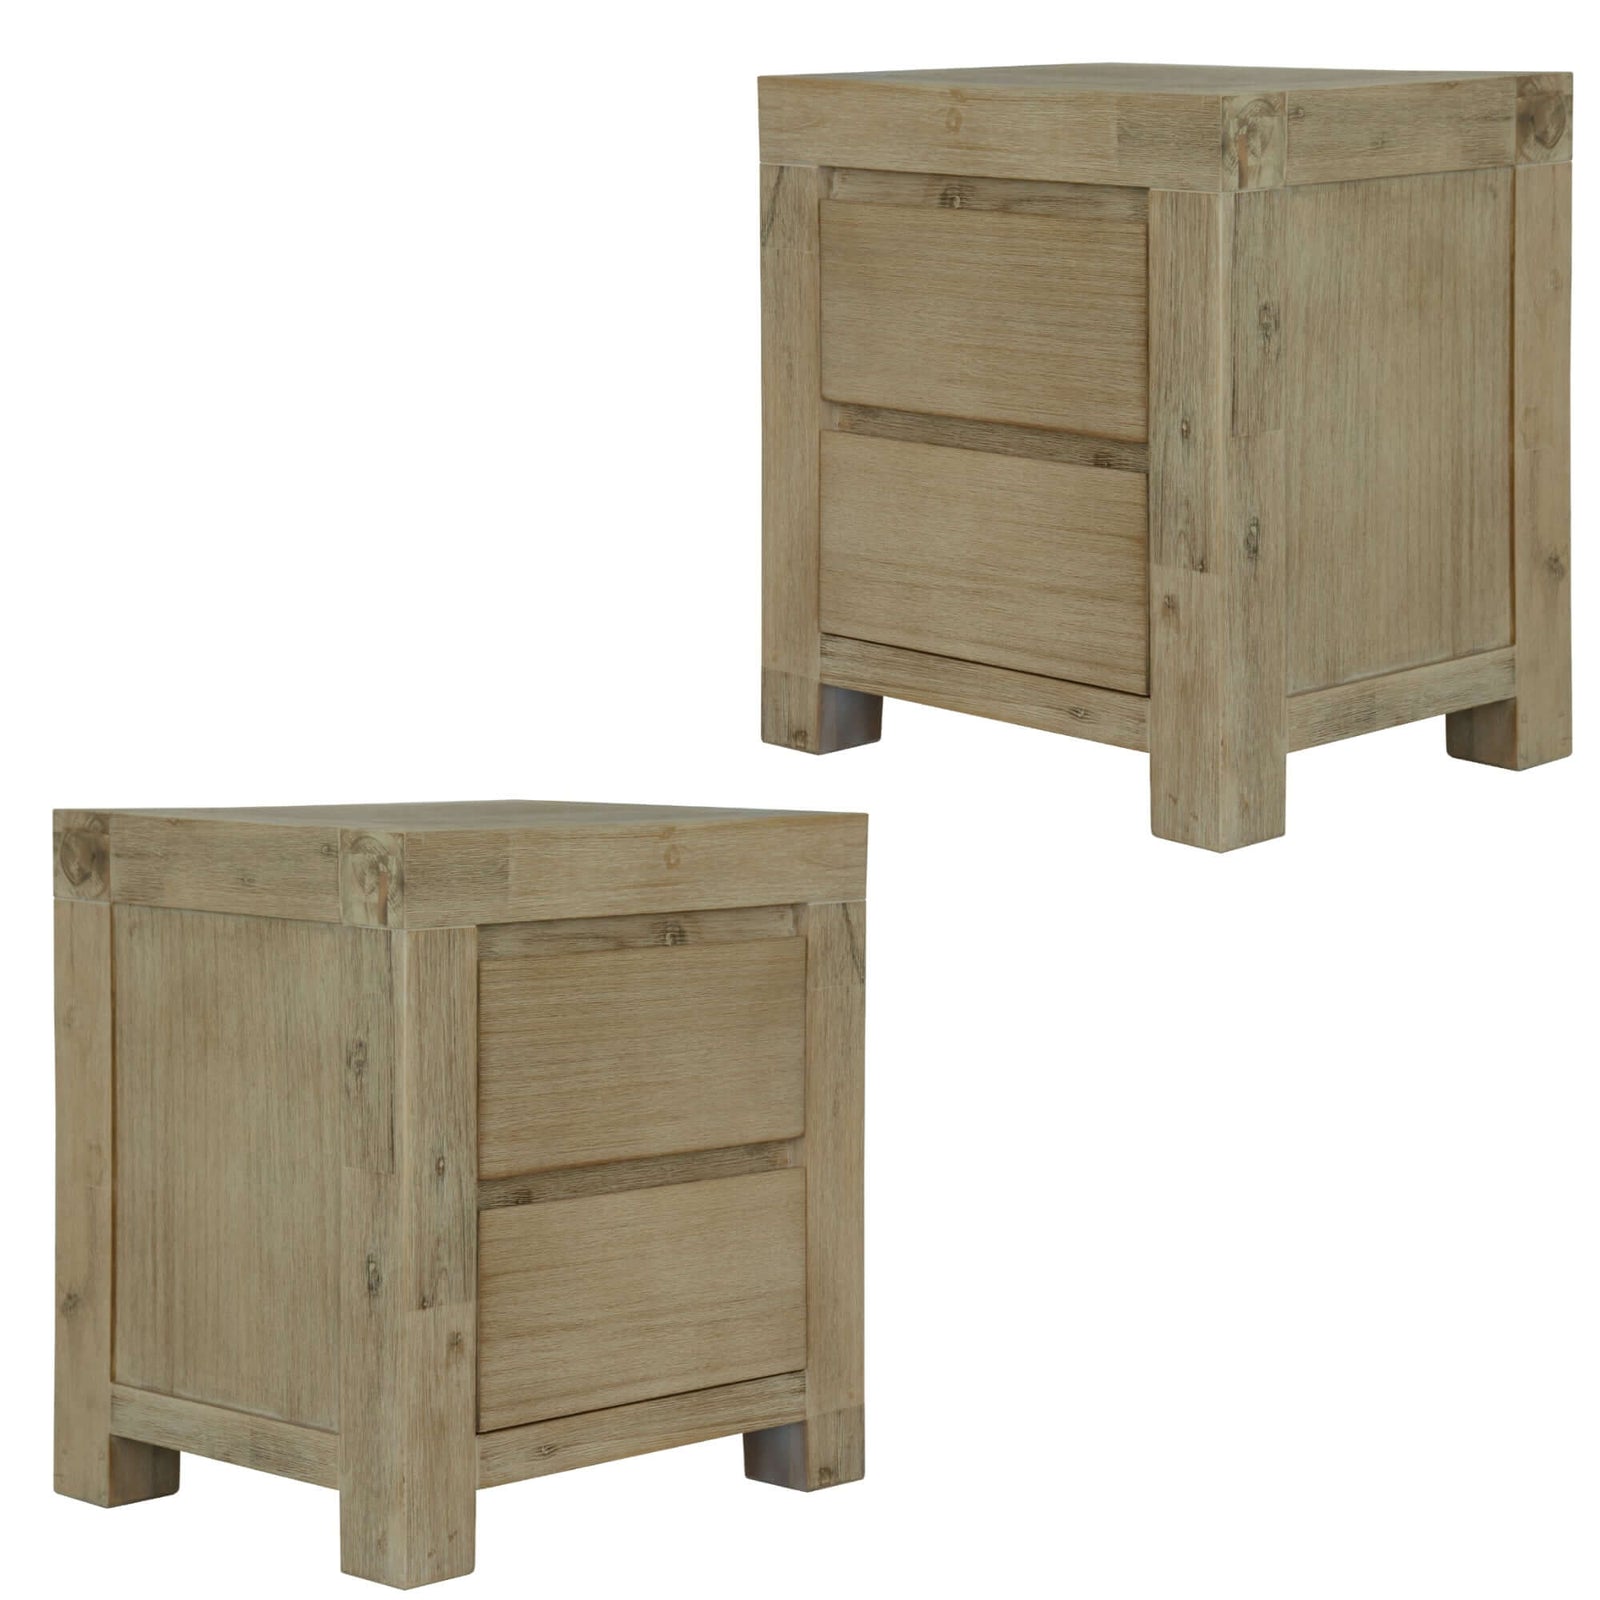 Brunet Set of 2 Bedside Tables 2 Drawers Cabinet Nightstand Table Brush Smoke-Upinteriors